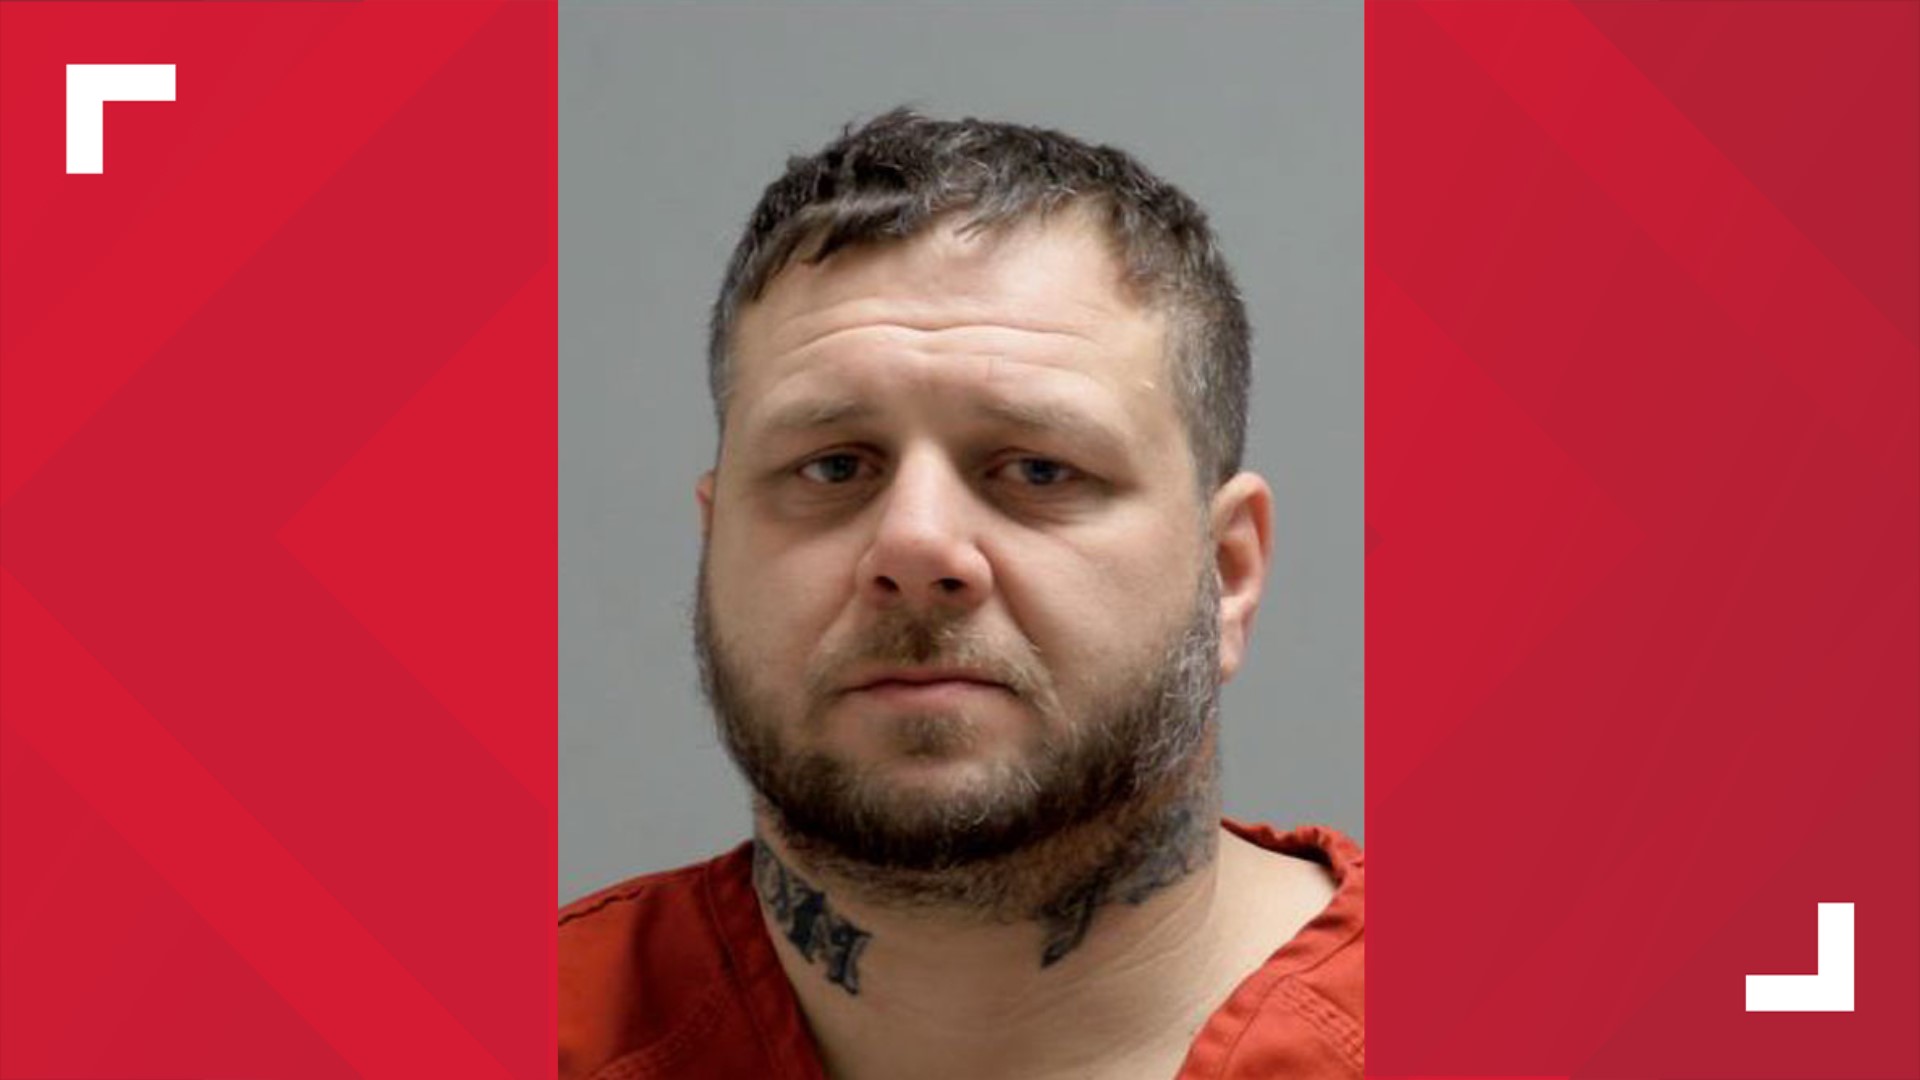 The sheriff's office said Shane Brown Jr. led deputies on a chase in Pickaway County before driving to the parking lot of the Franklin County jail and surrendering.